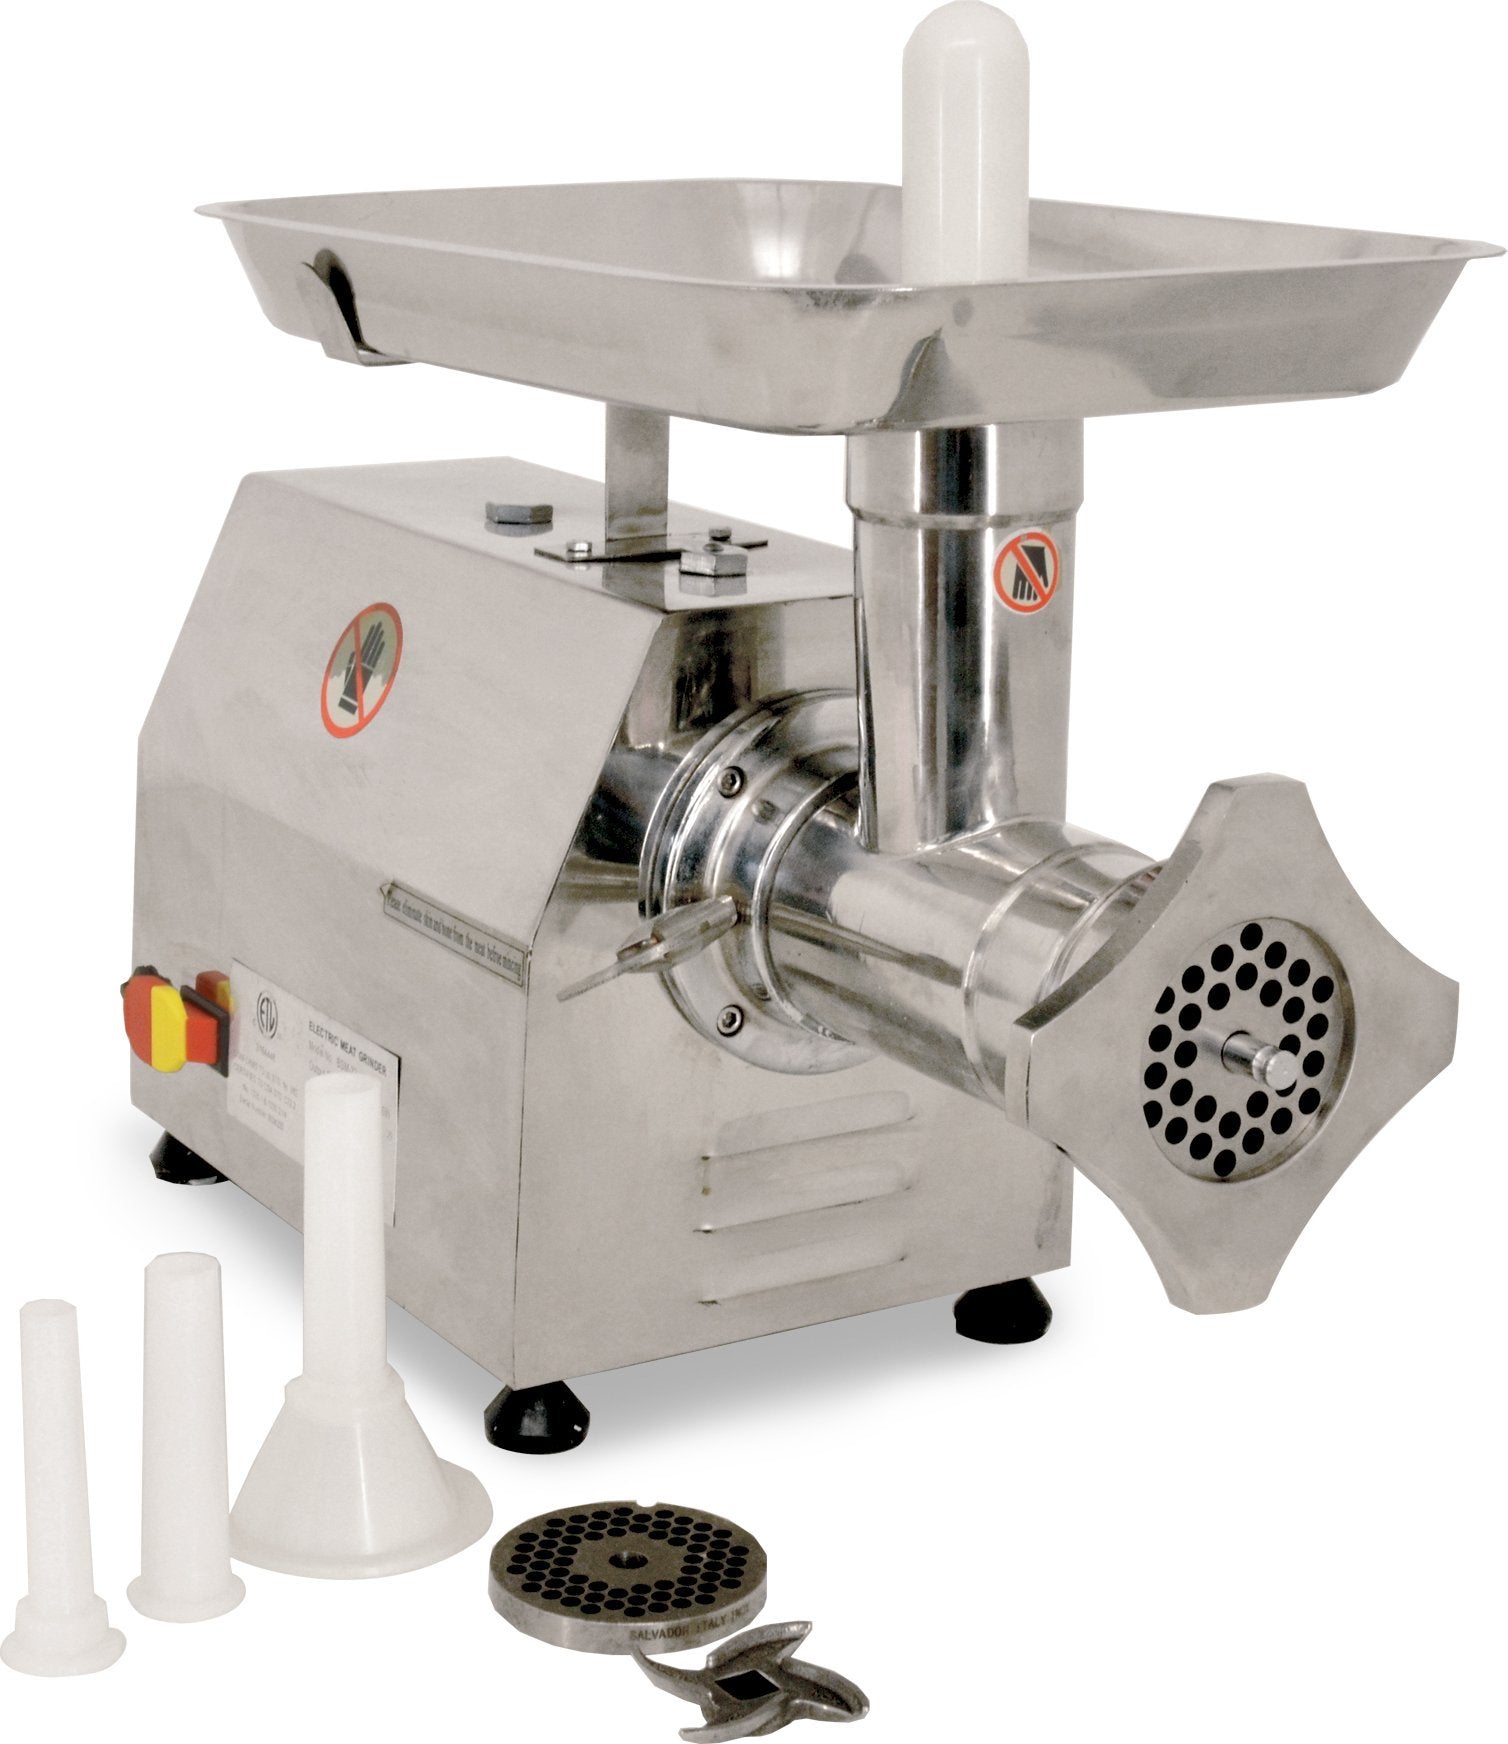 Omcan - #22 Economical Stainless Steel Meat Grinder 1.5 HP - MG-CN-0022-S